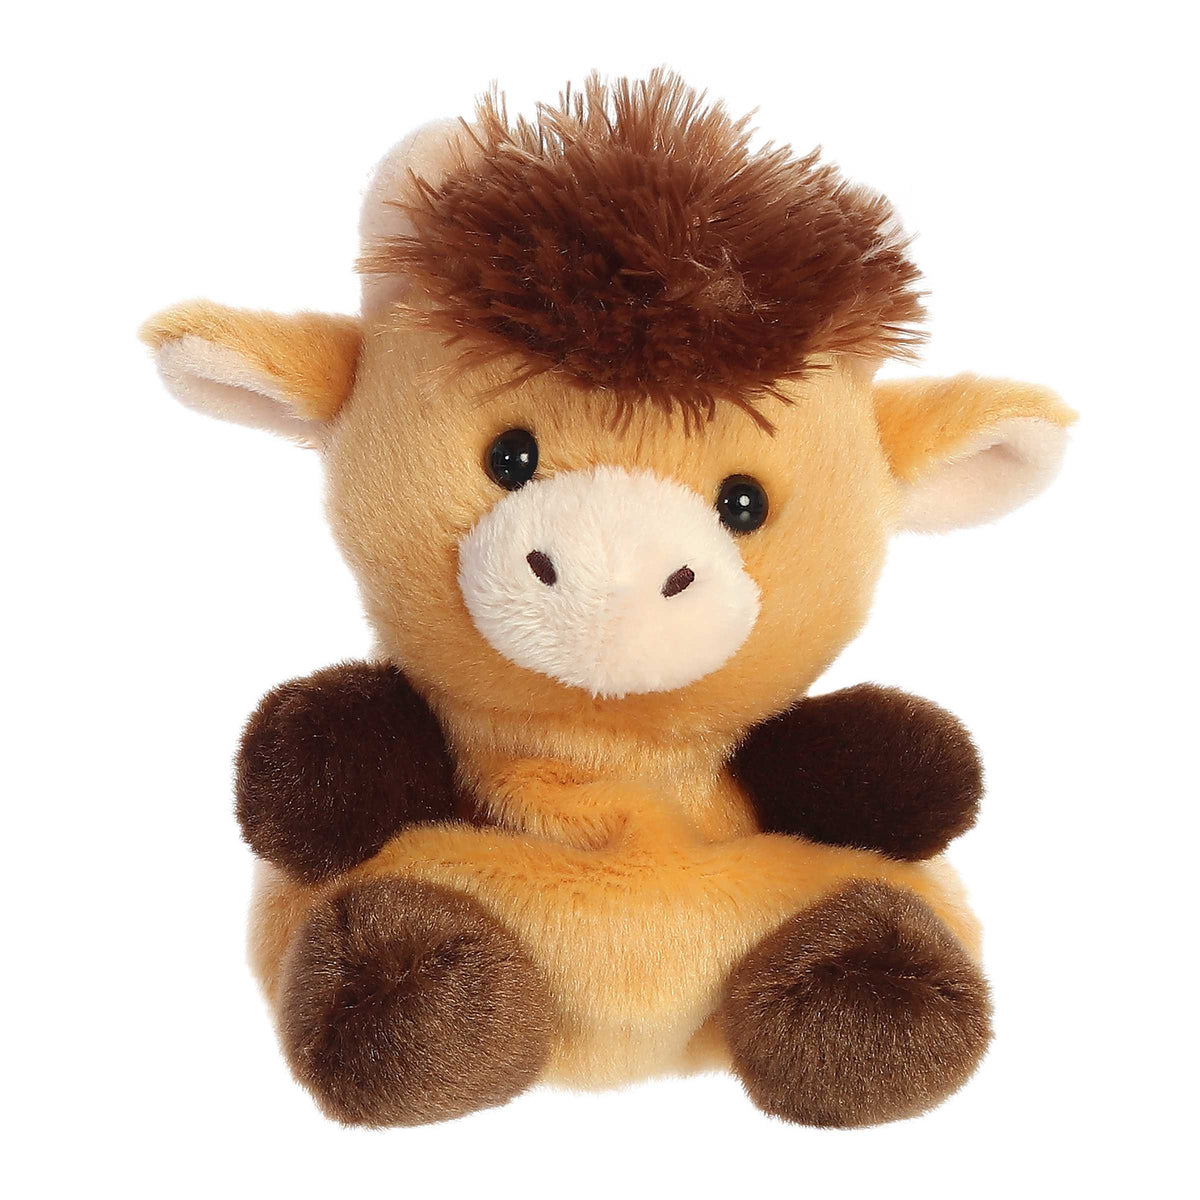 With his tufty chocolate-brown hair and soft, caramel-hued fur, Hubert boasts an adorably earnest expression!